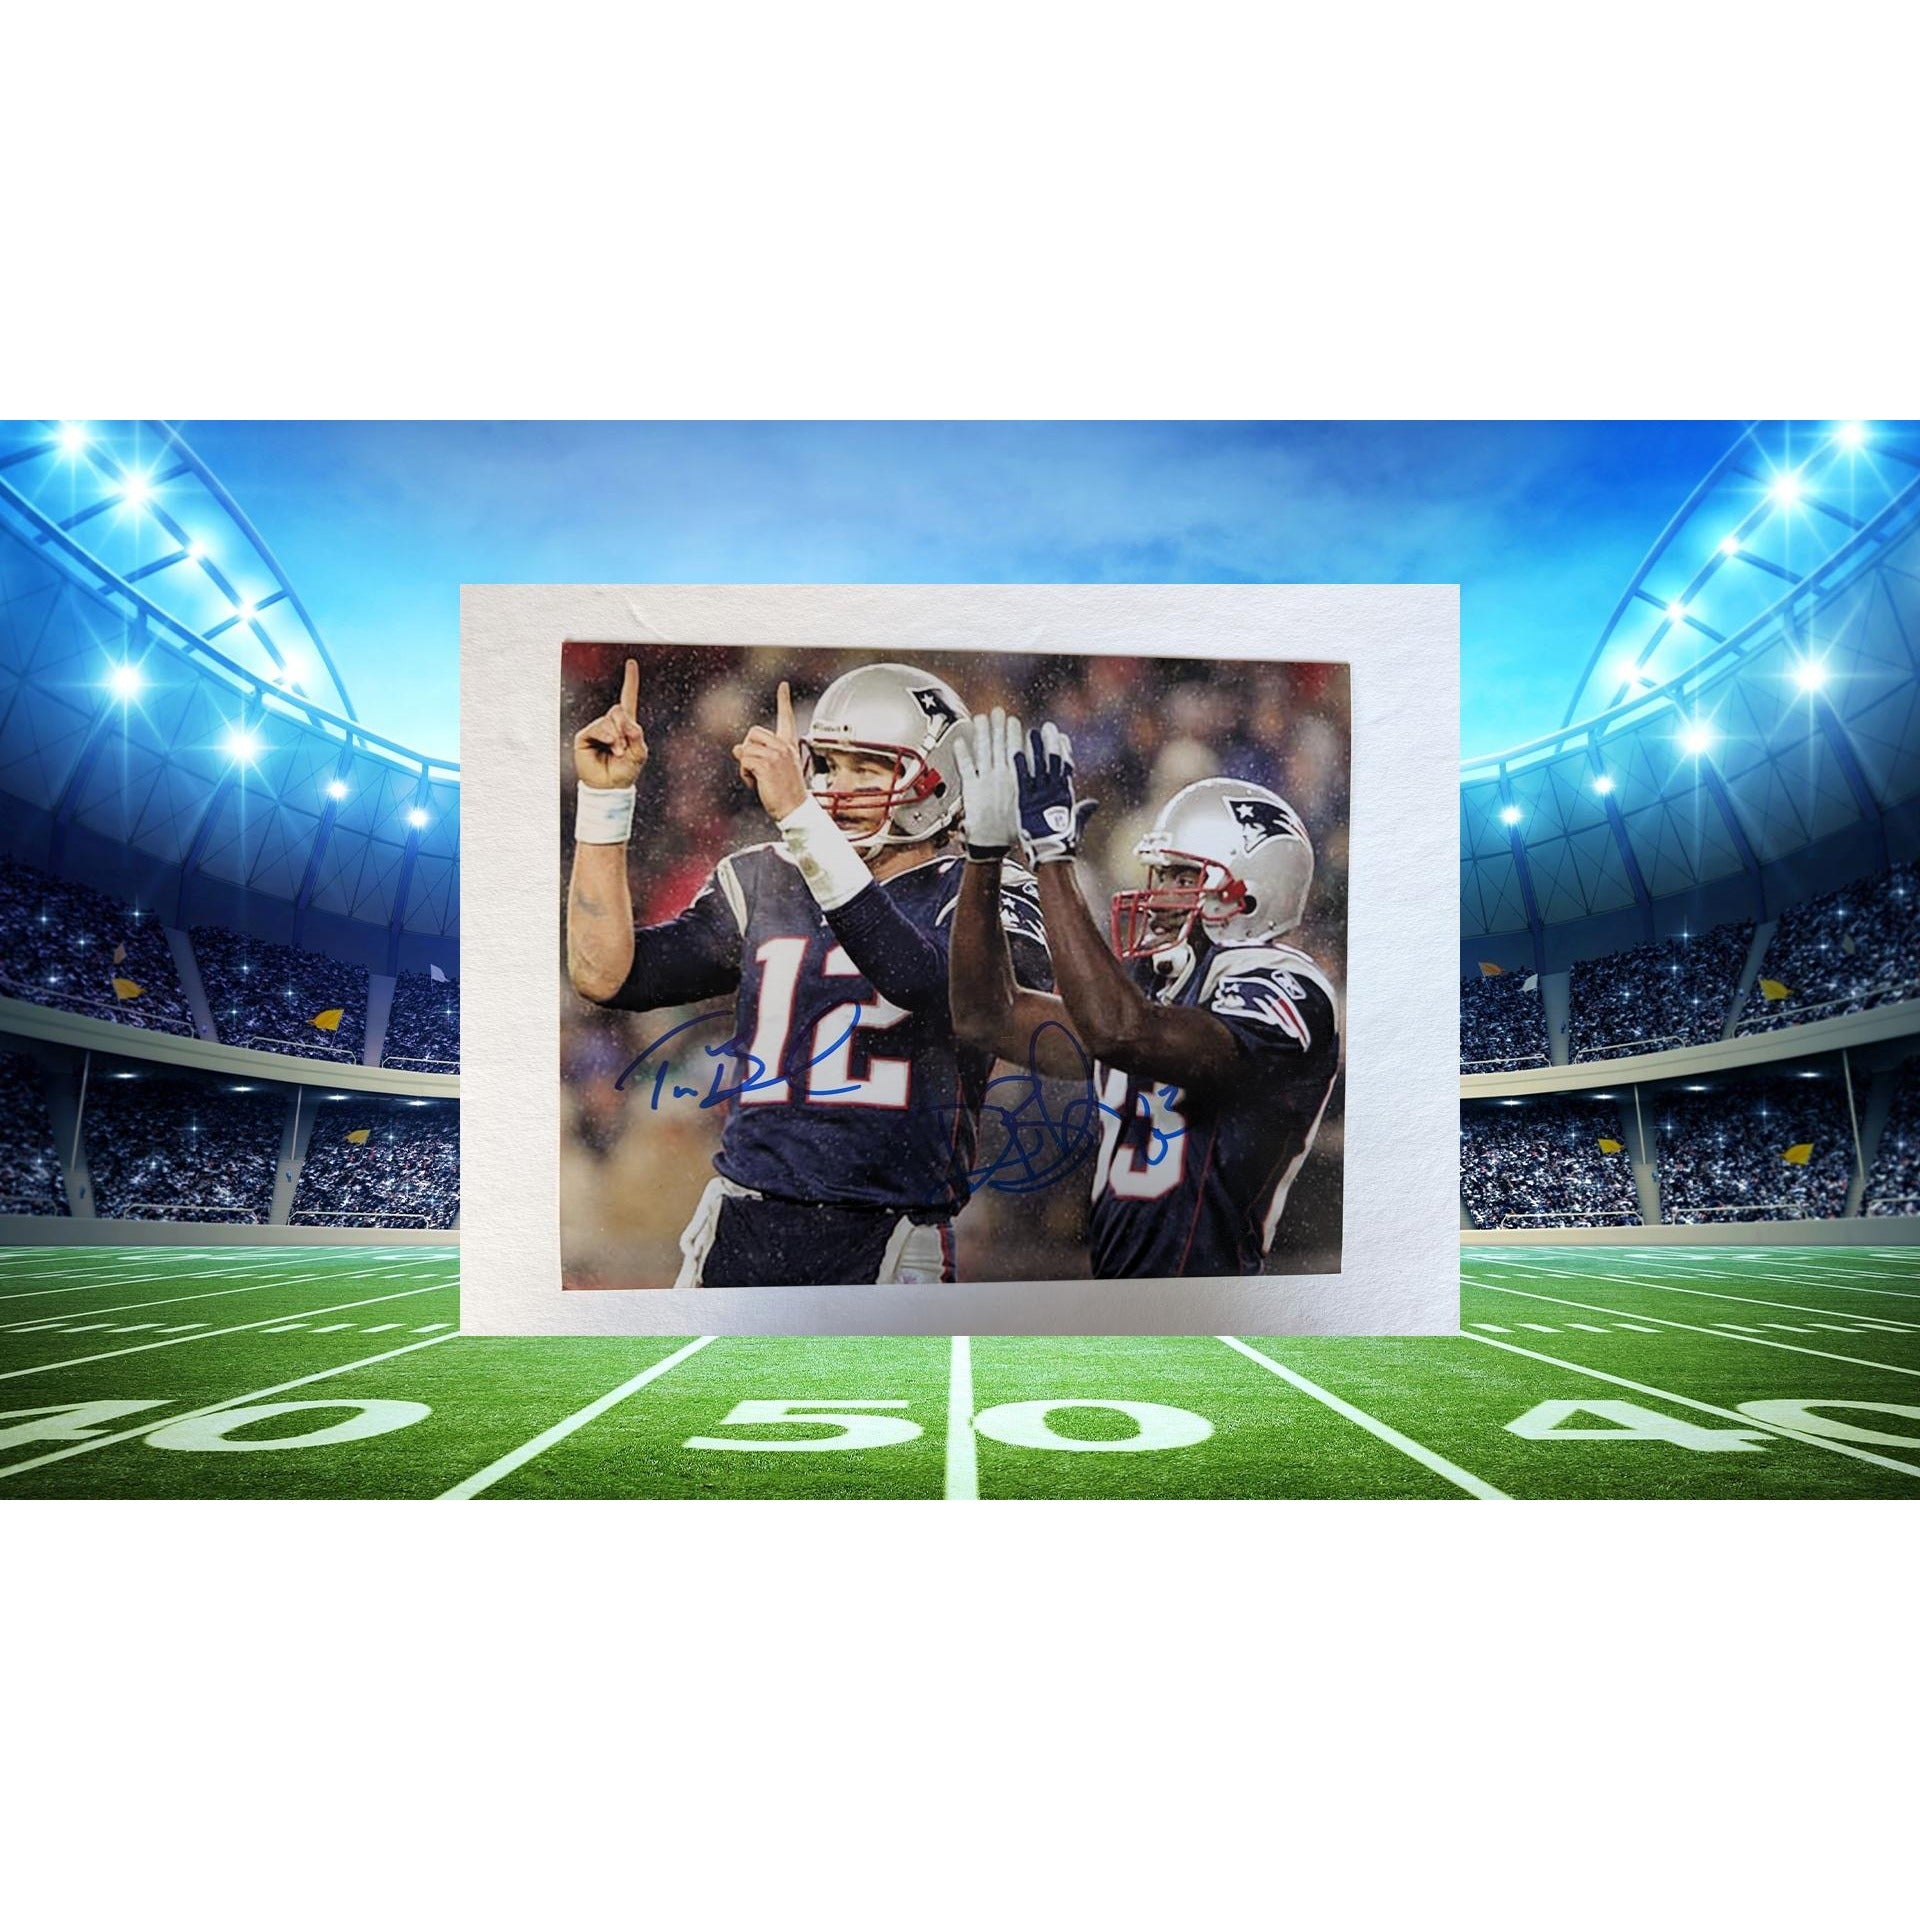 Deion Branch and Tom Brady New England Patriots Super Bowl MVPs 8x10 photo signed with proof